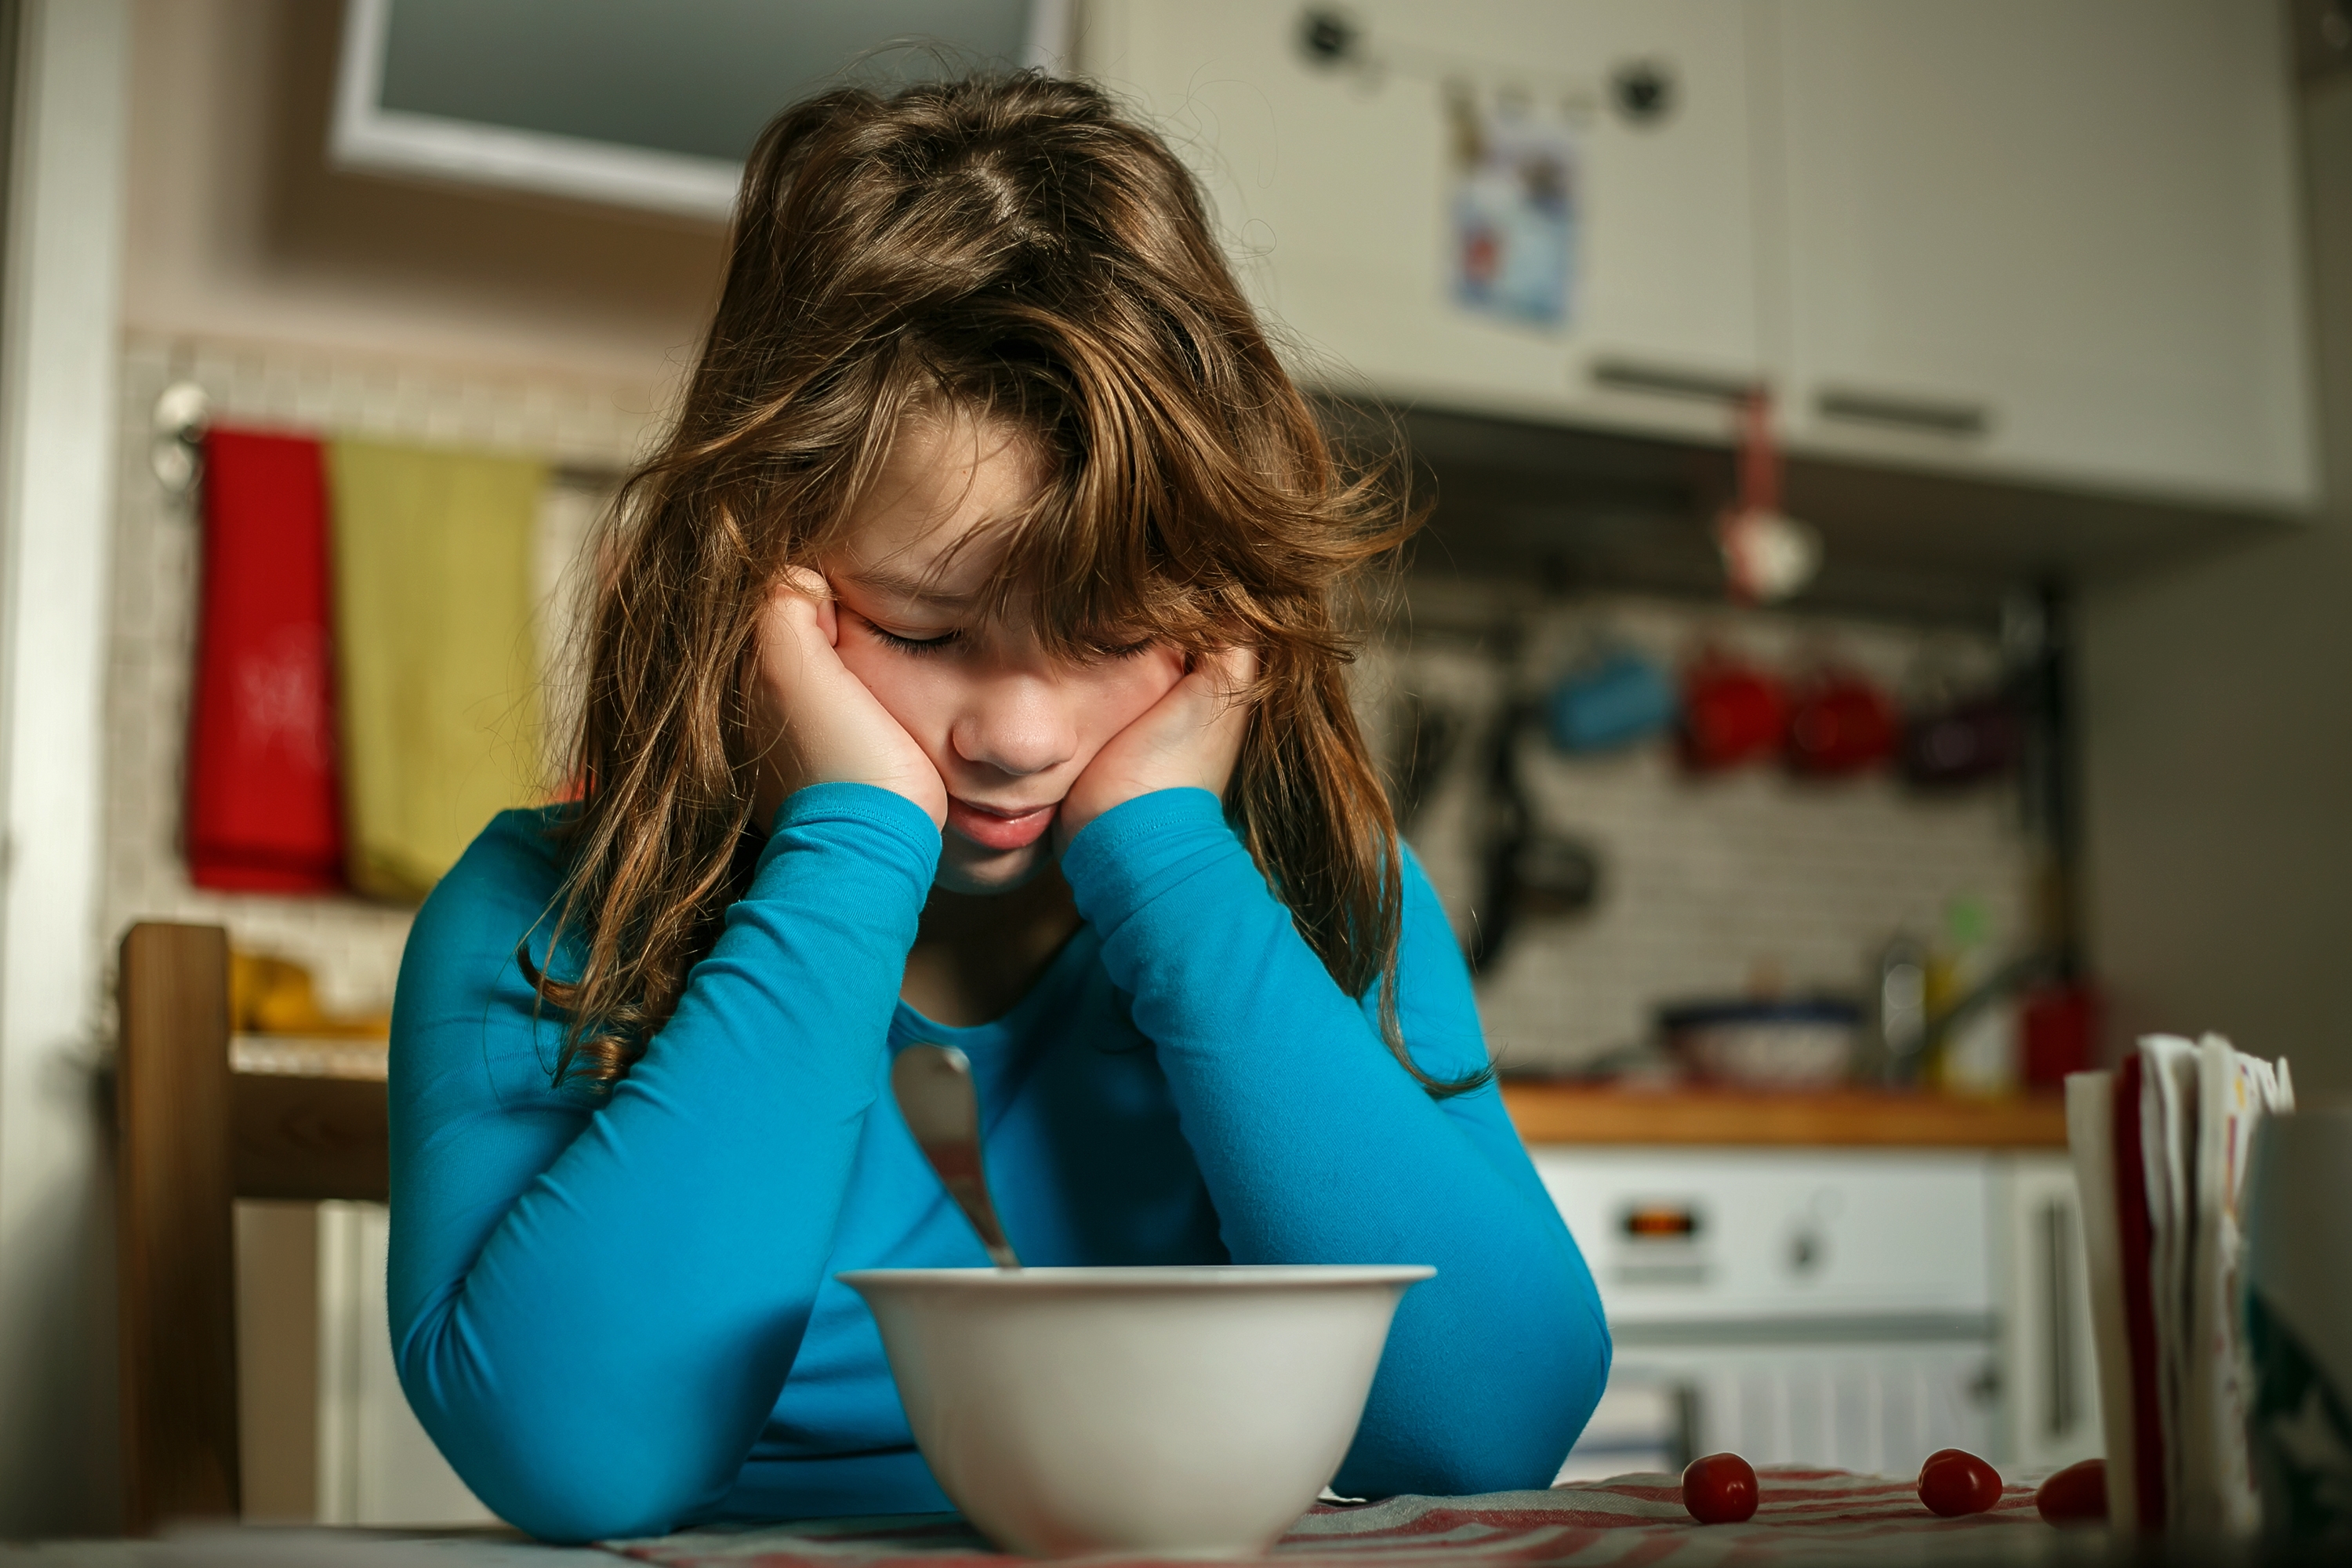 The girl bent over her breakfast plate in a disgruntled pose | Source: Shutterstock.com